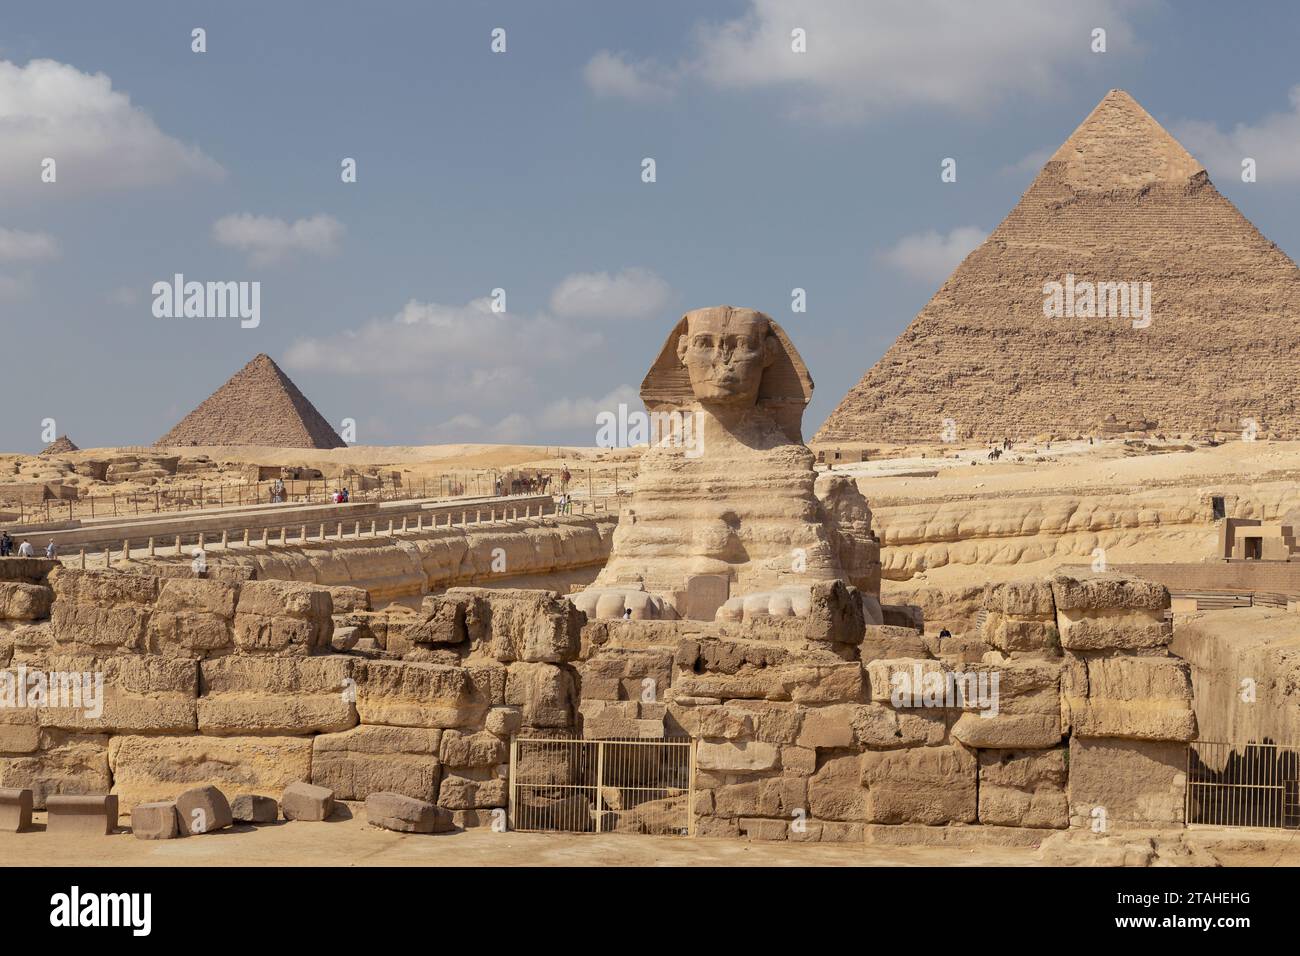 The Great Sphinx of Gyza with pyramid behind during sunny day Stock Photo